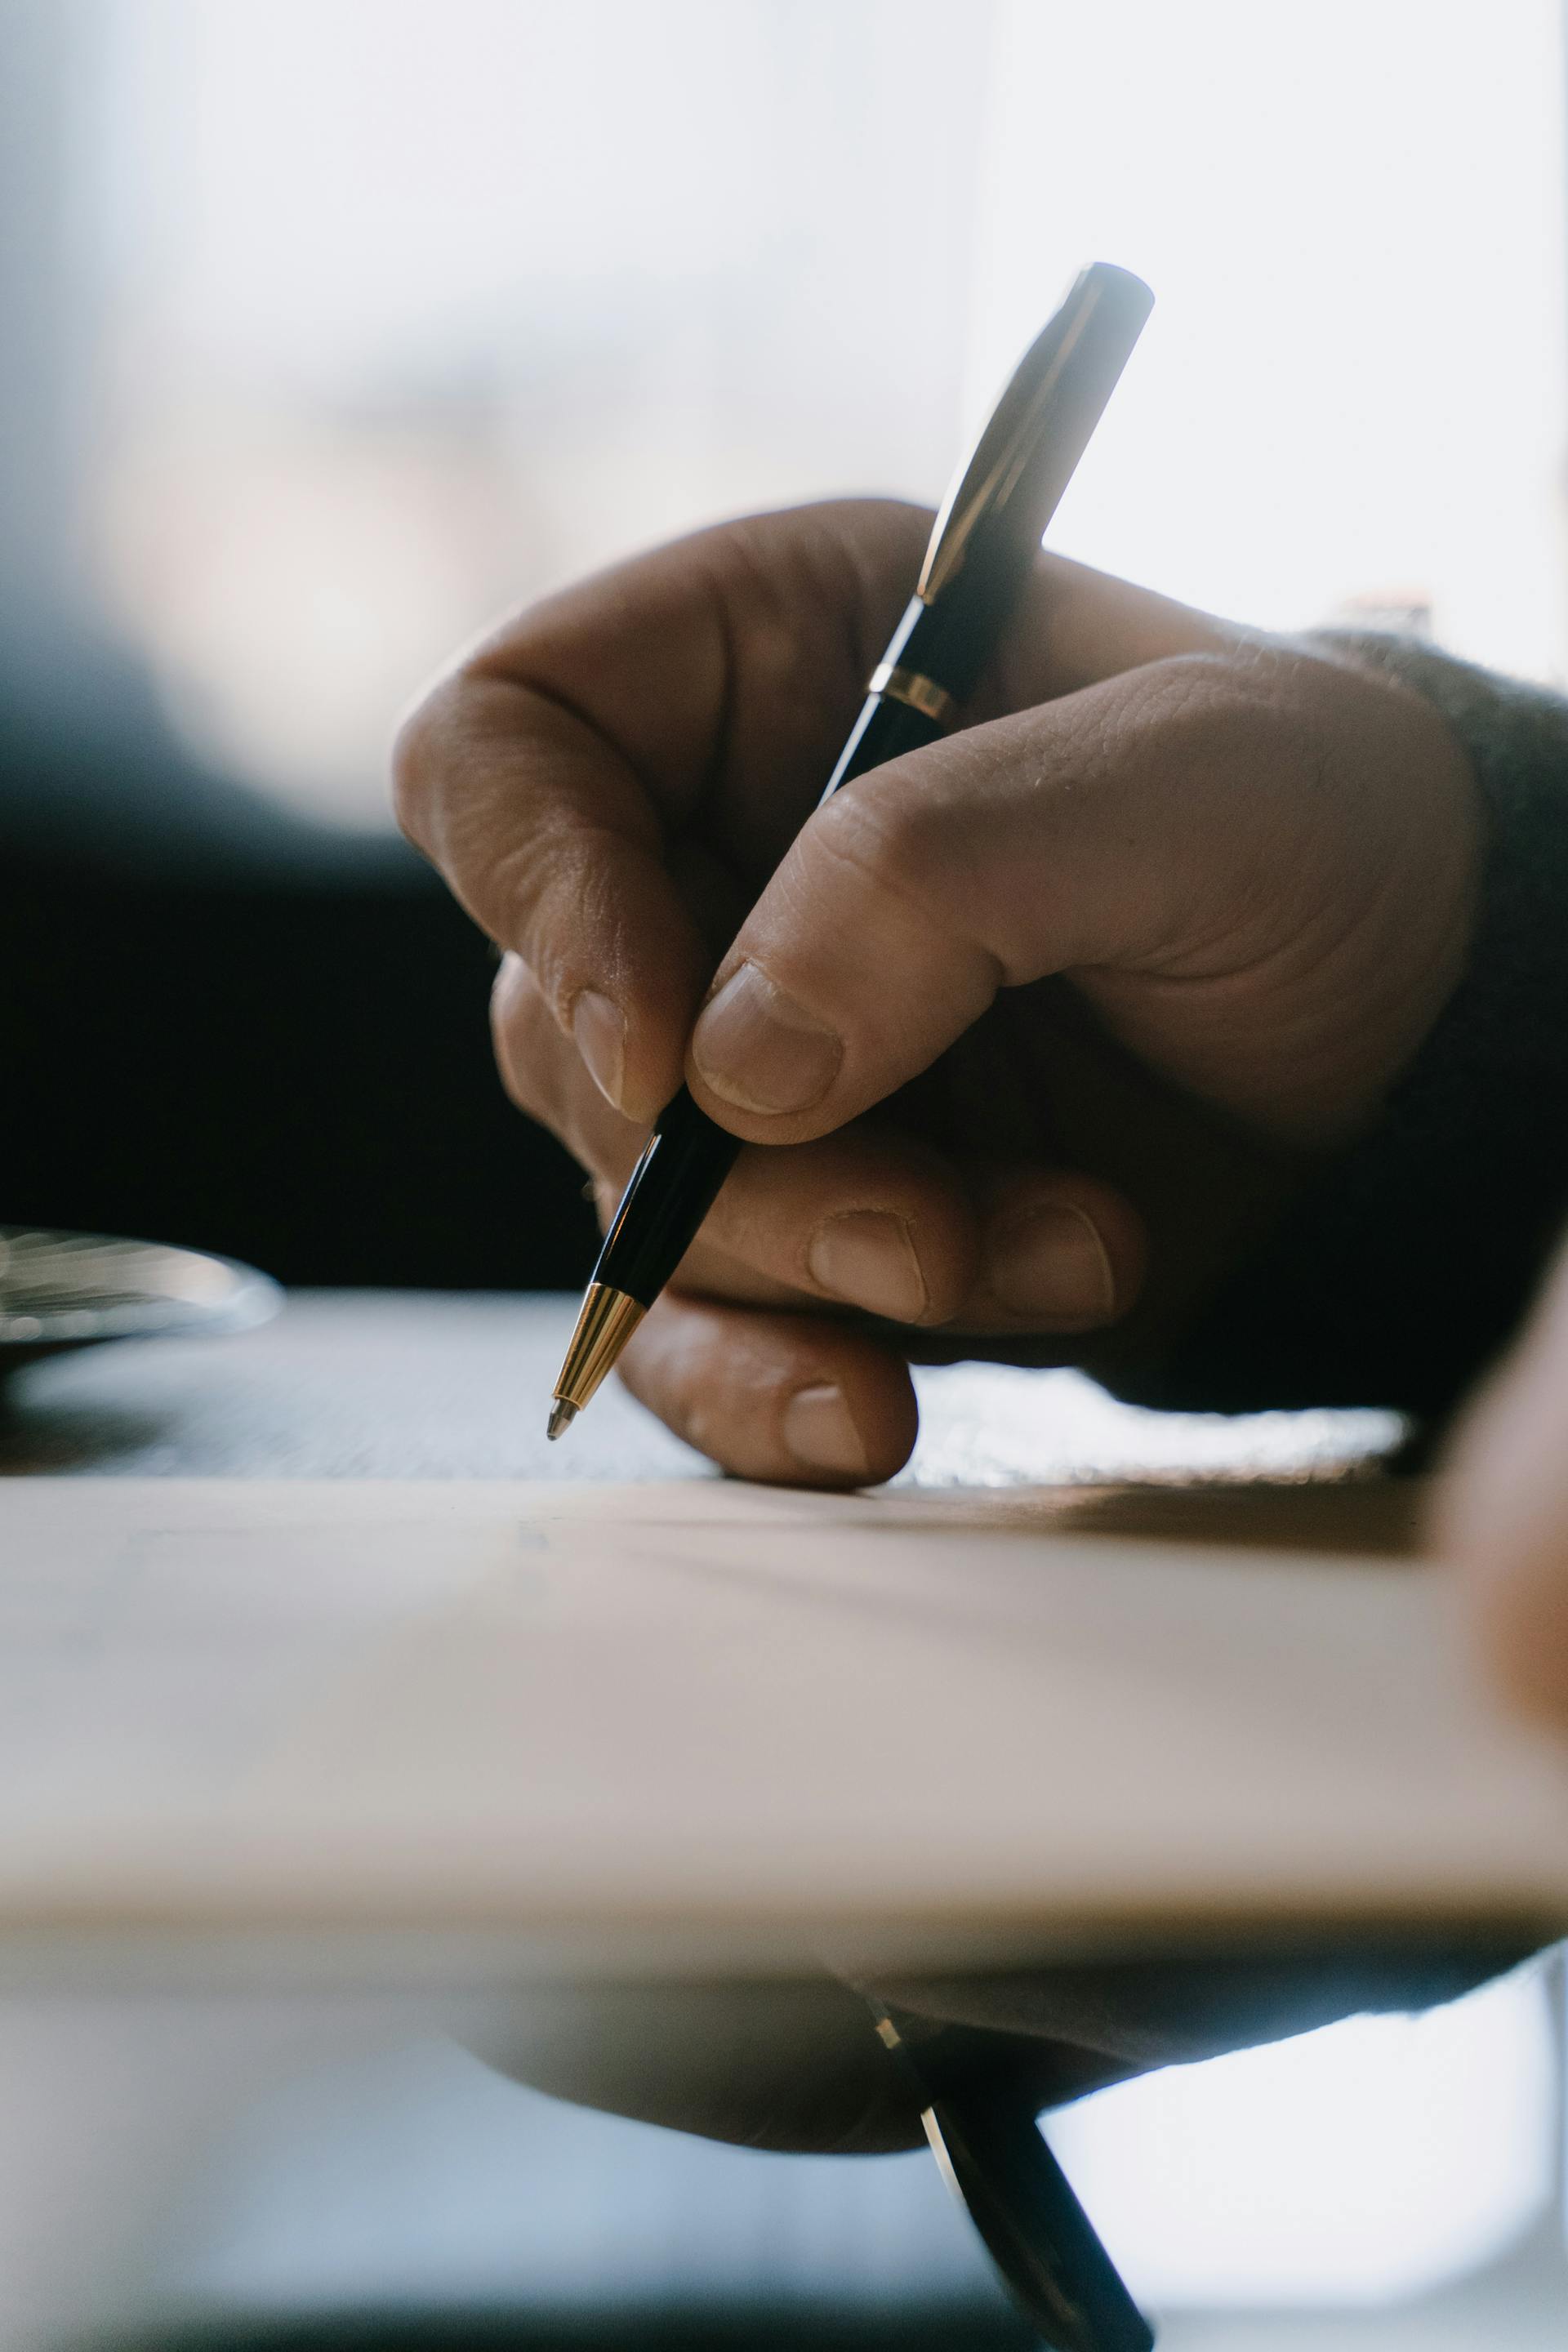 A man writing on a piece of paper | Source: Pexels